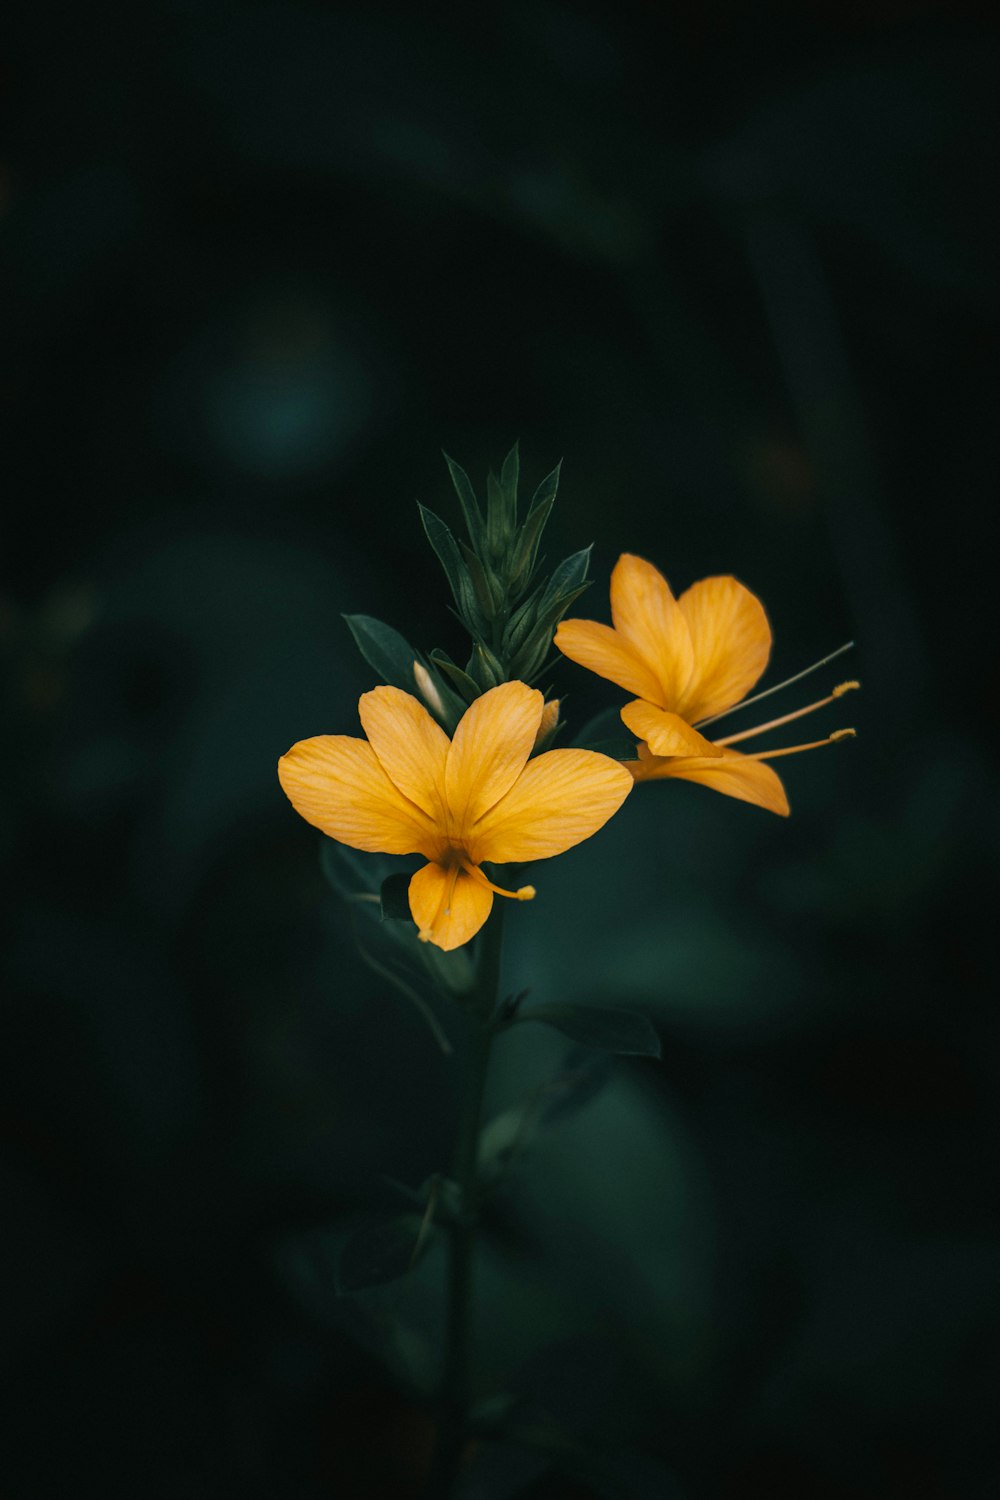 two yellow flowers with green leaves on a dark background